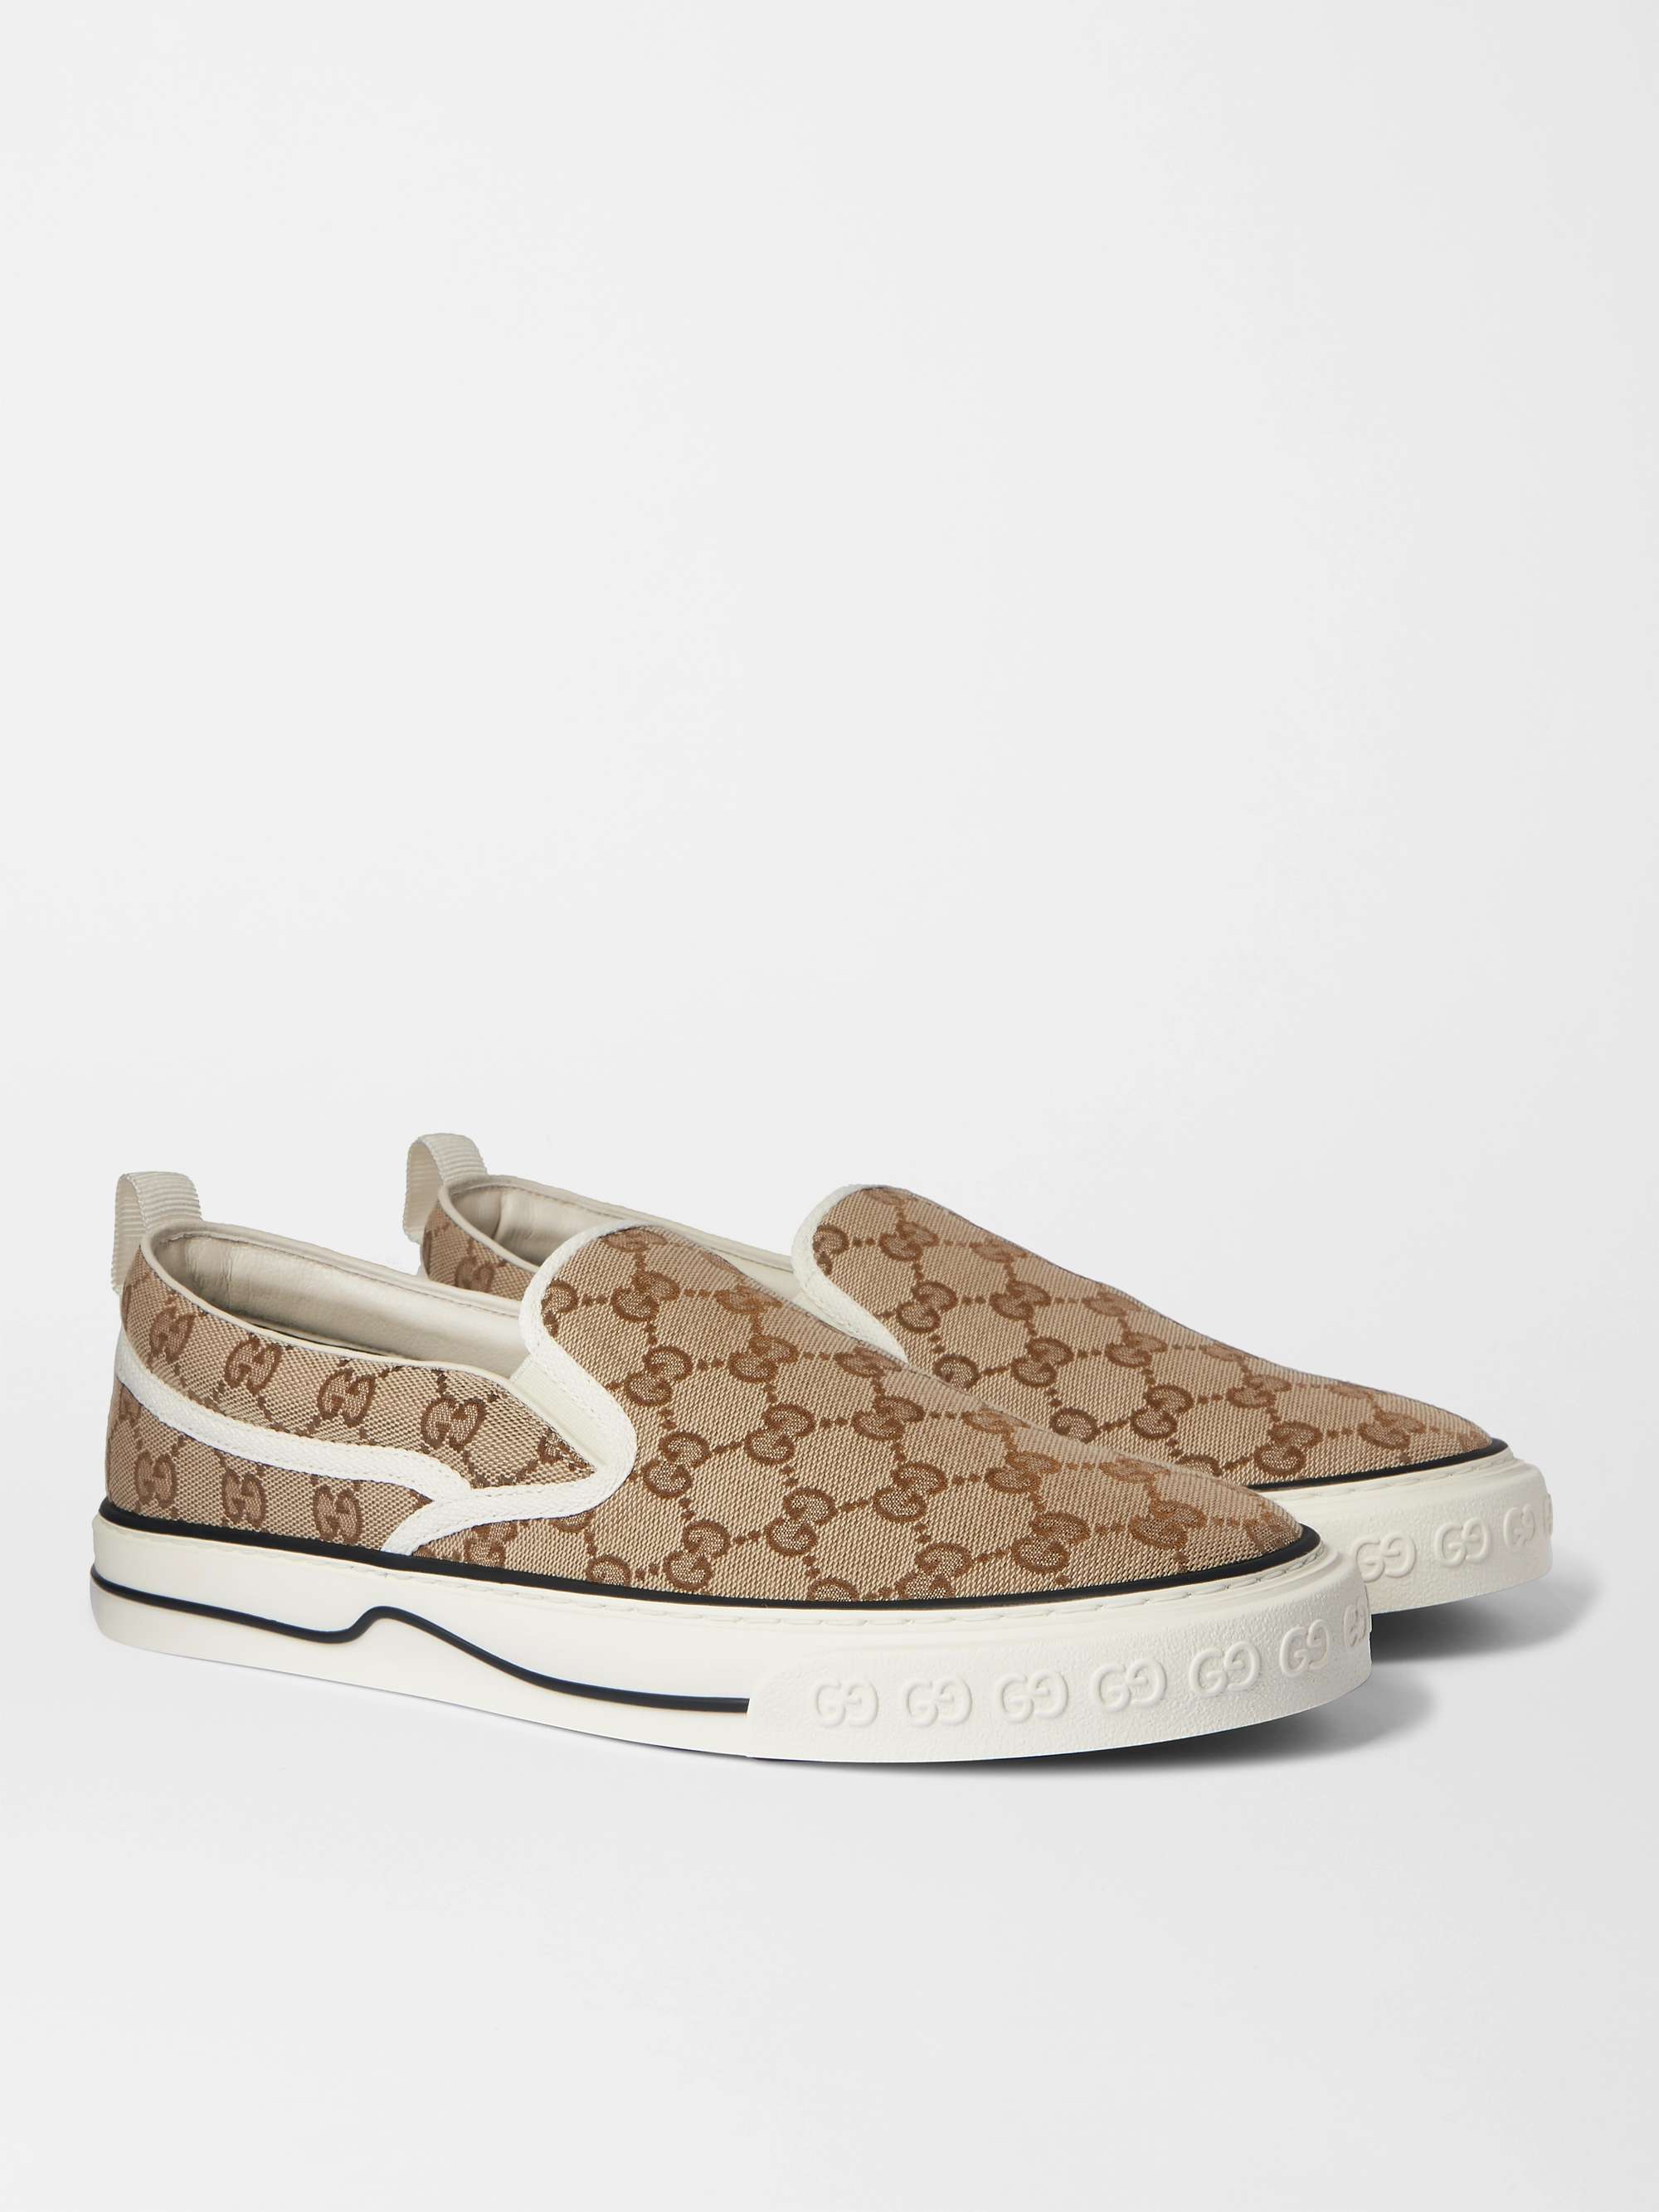 Gucci GG Monogram Tennis Slip On Sneakers - A&V Pawn